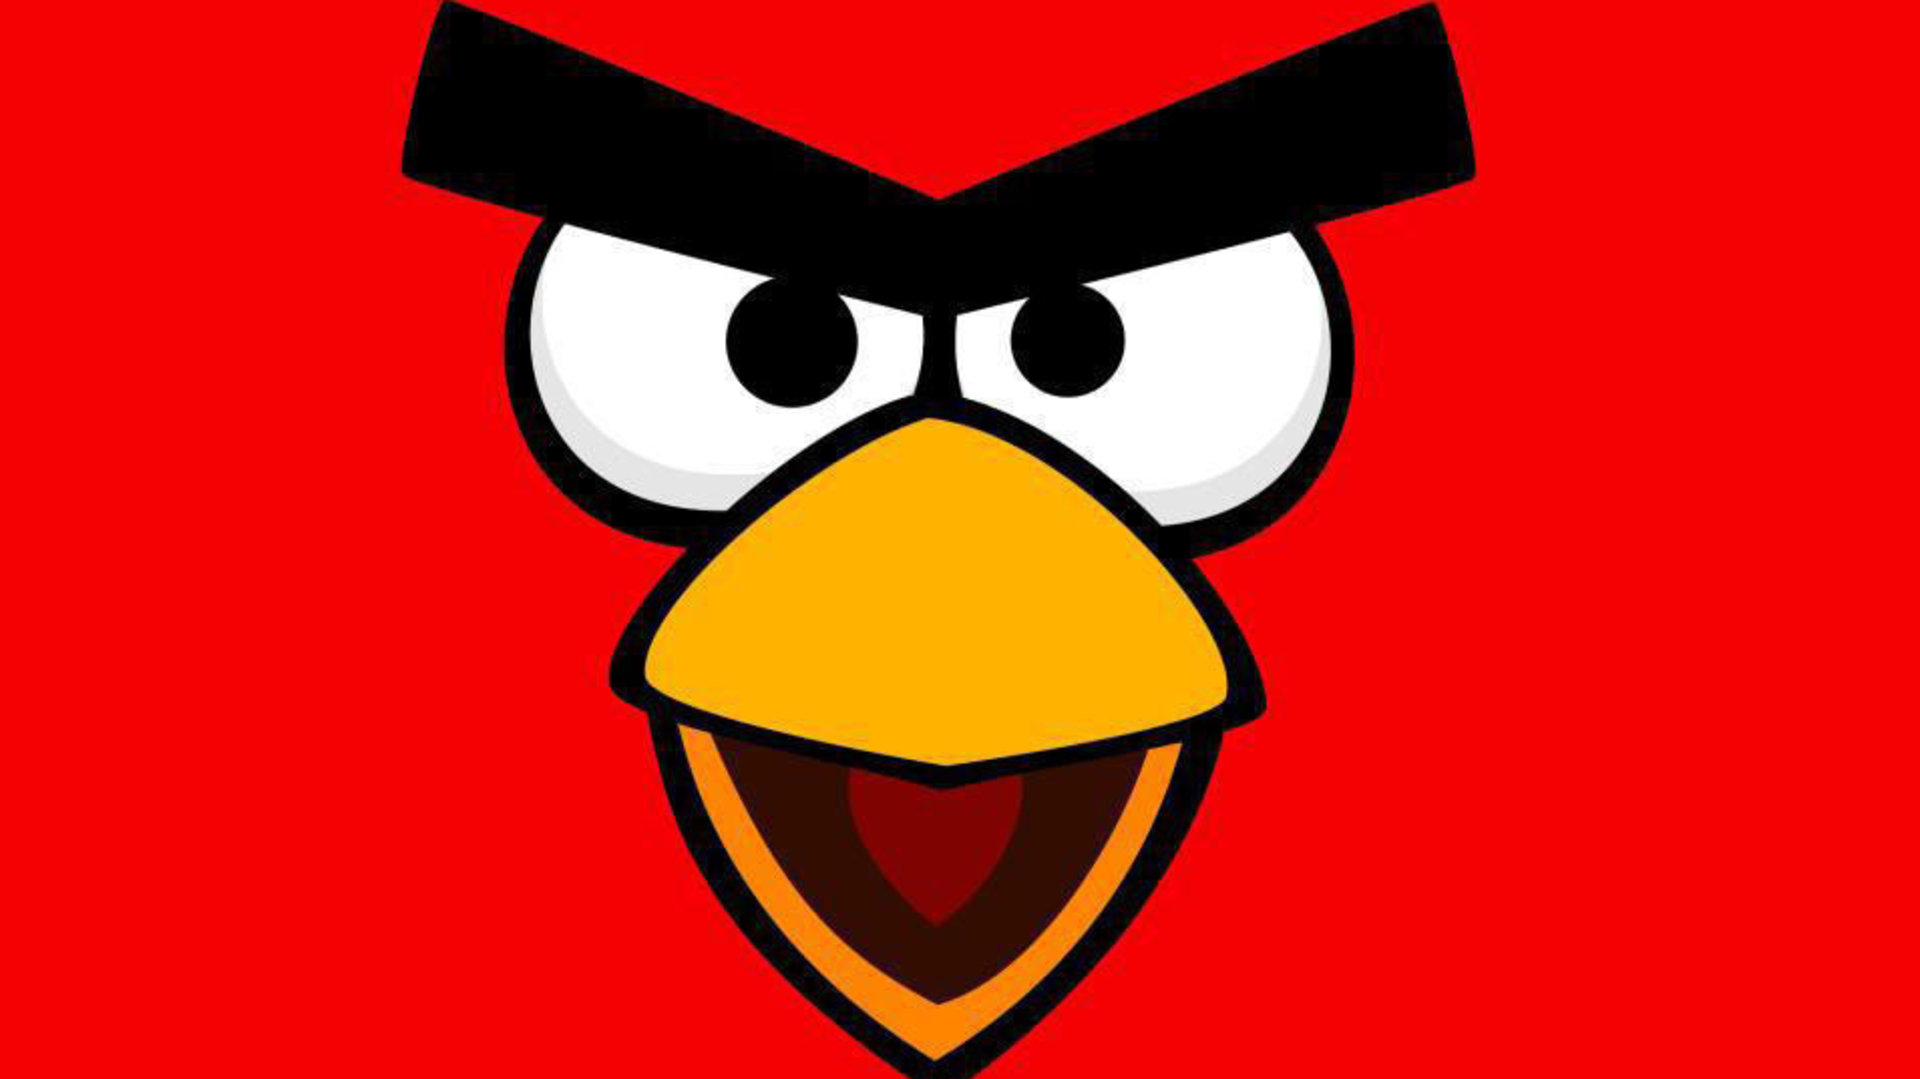 Sega is about to acquire Rovio, the mobile games studio that created Angry Birds